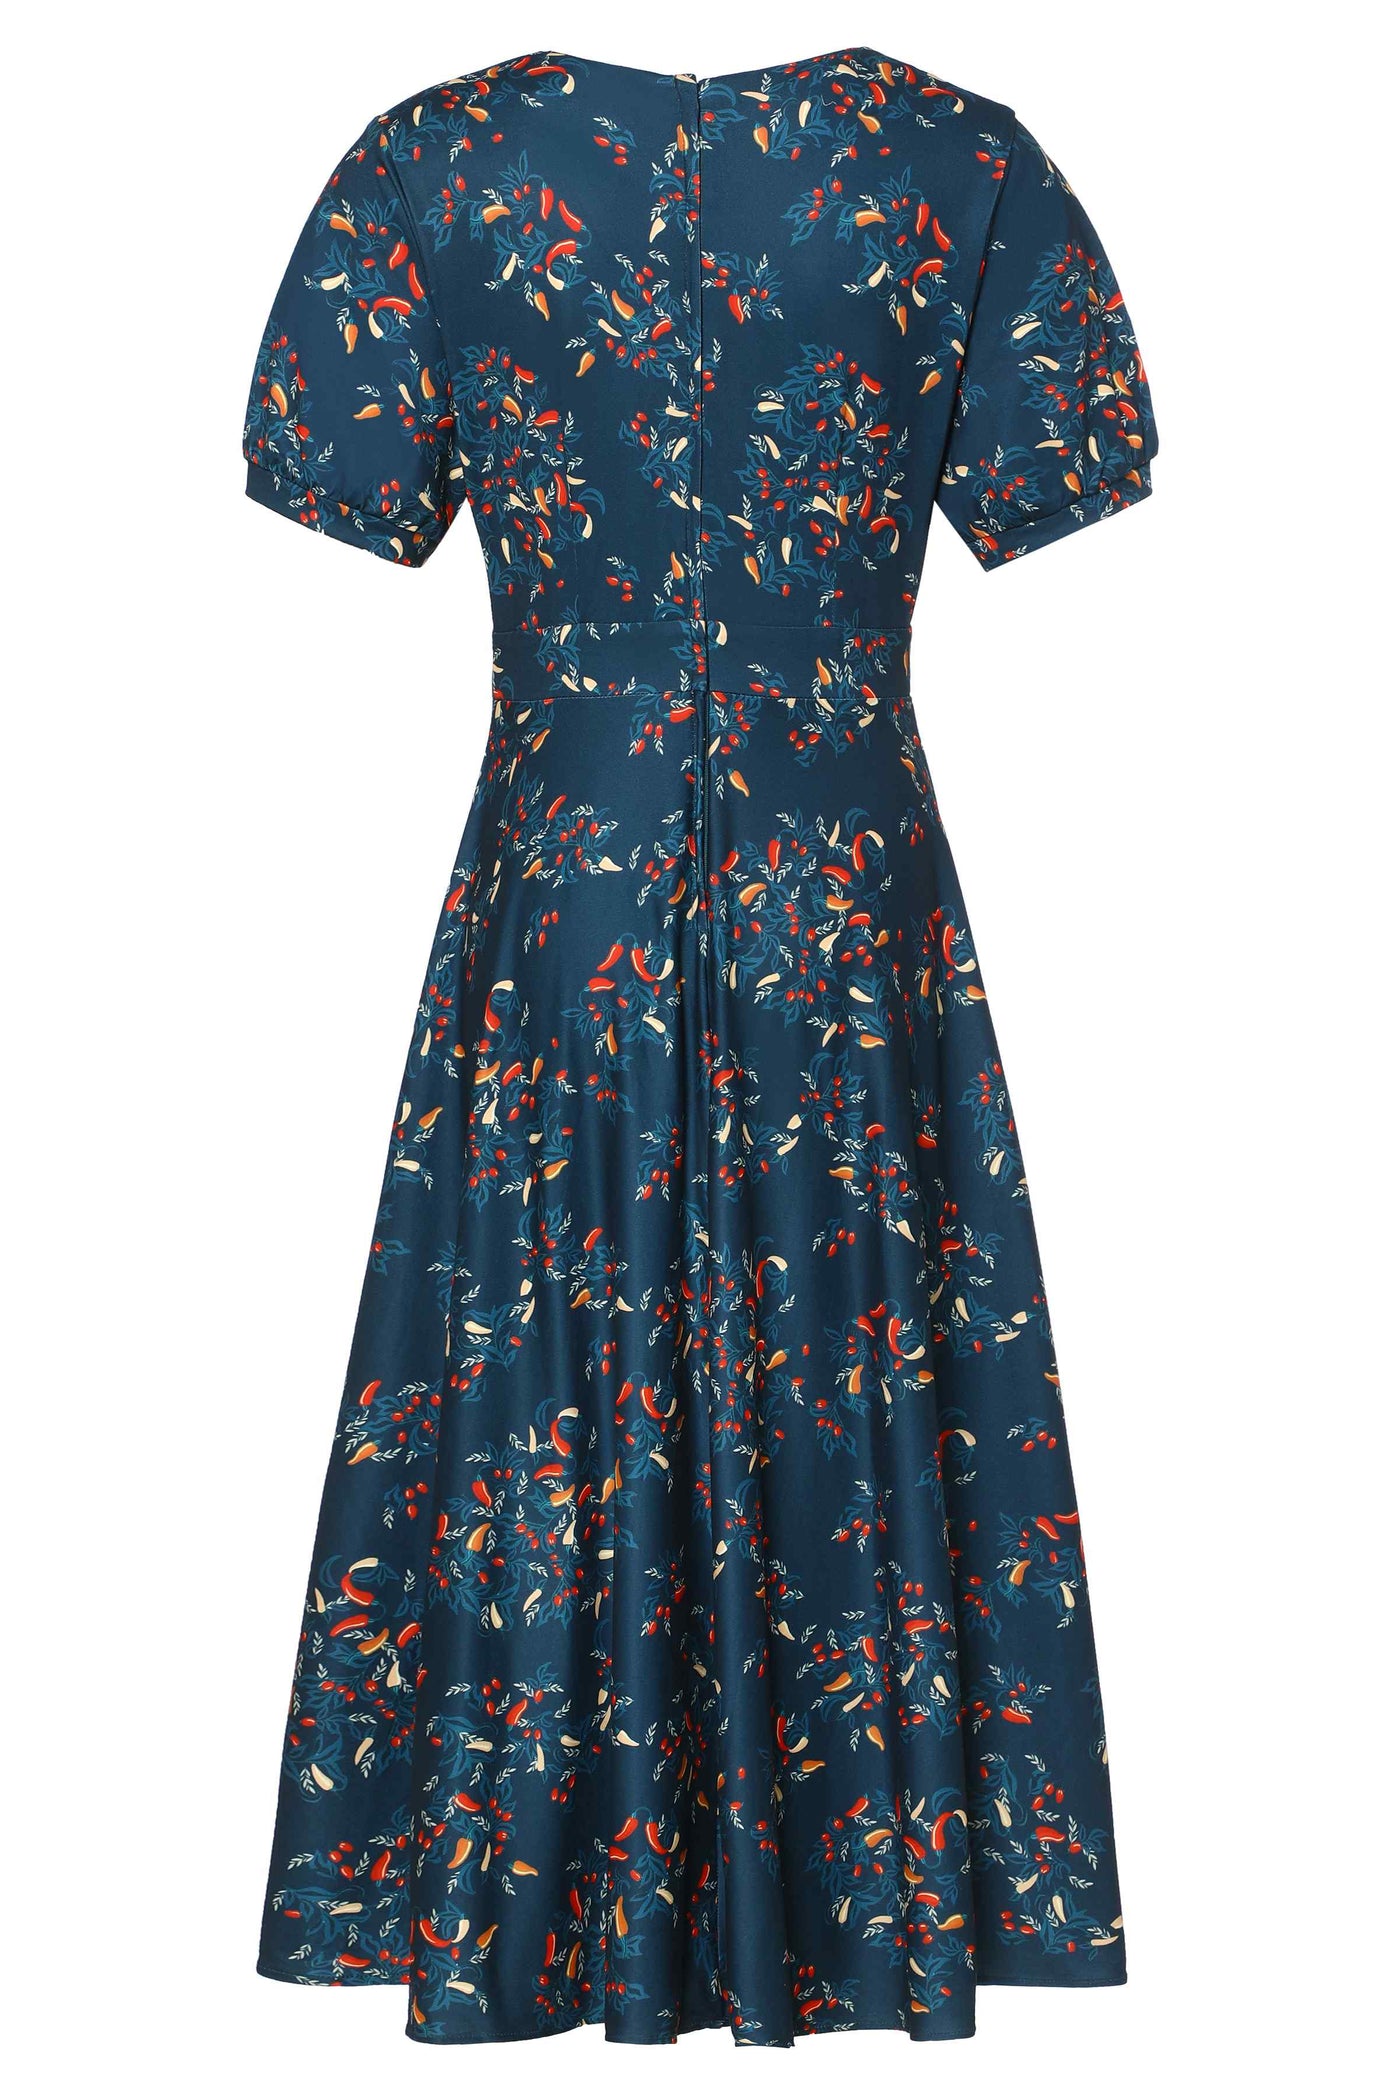 Back View of 50s style blue chili print vintage swing dress